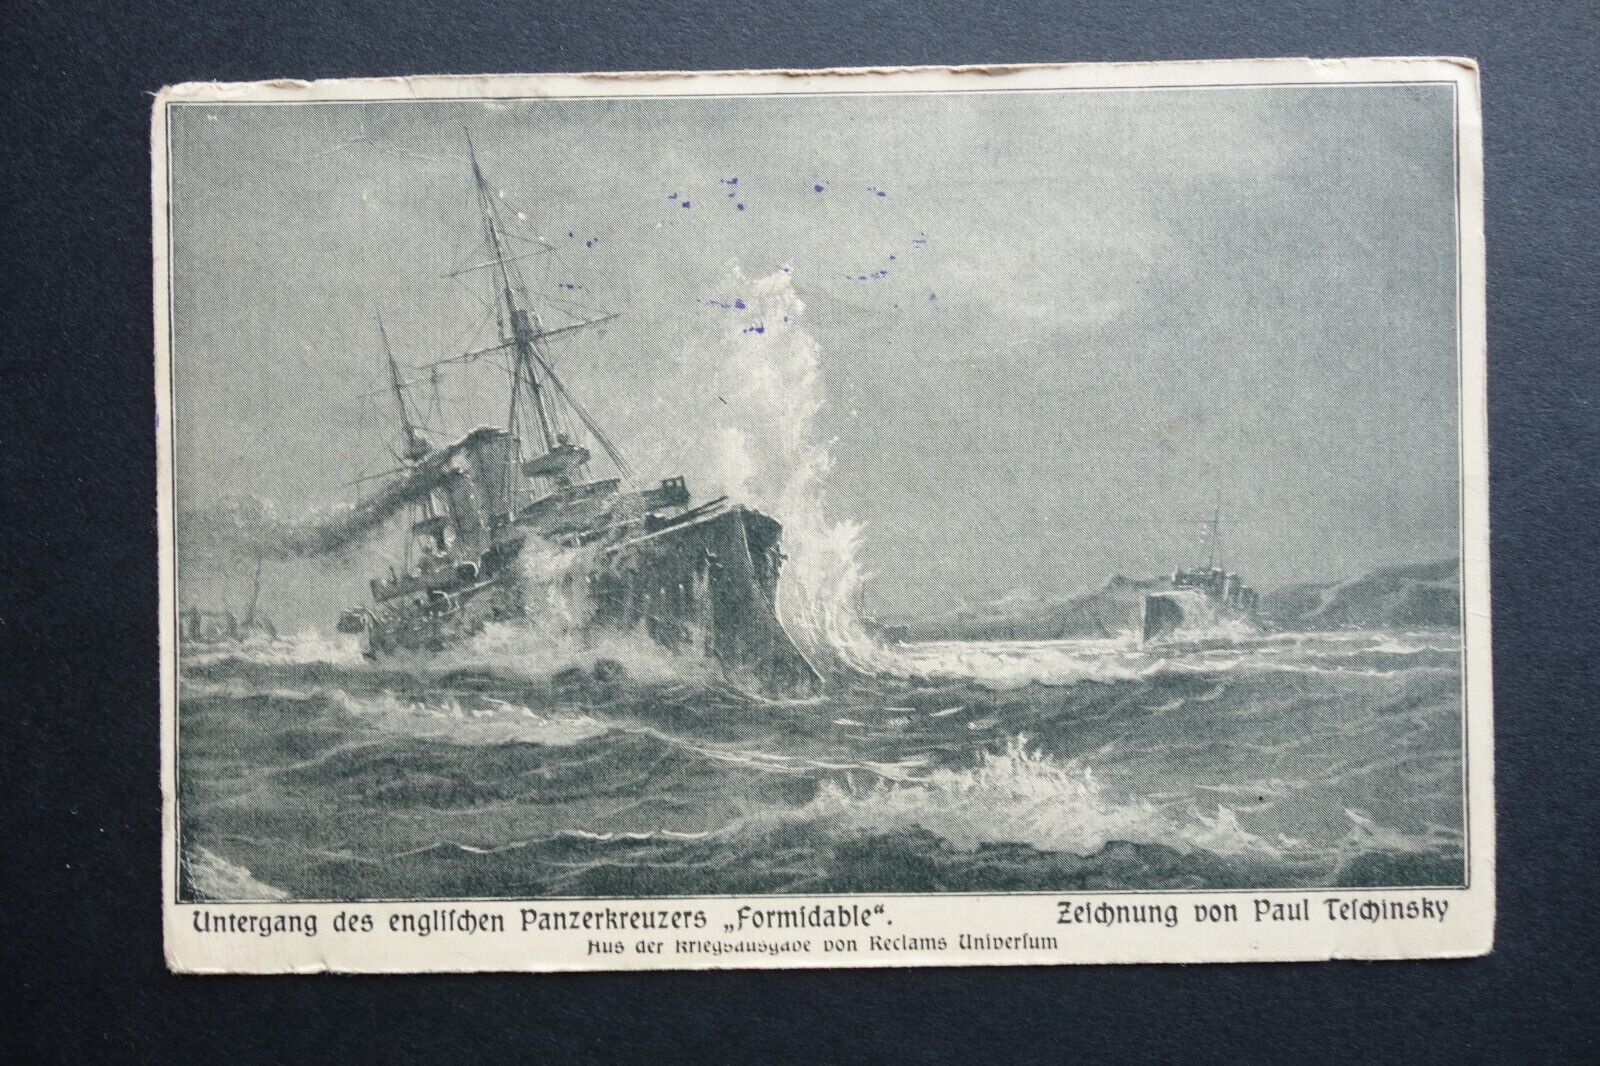 Sinking of armored English cruiser Formidable, art by P Telchinsky Navy pmk 1915